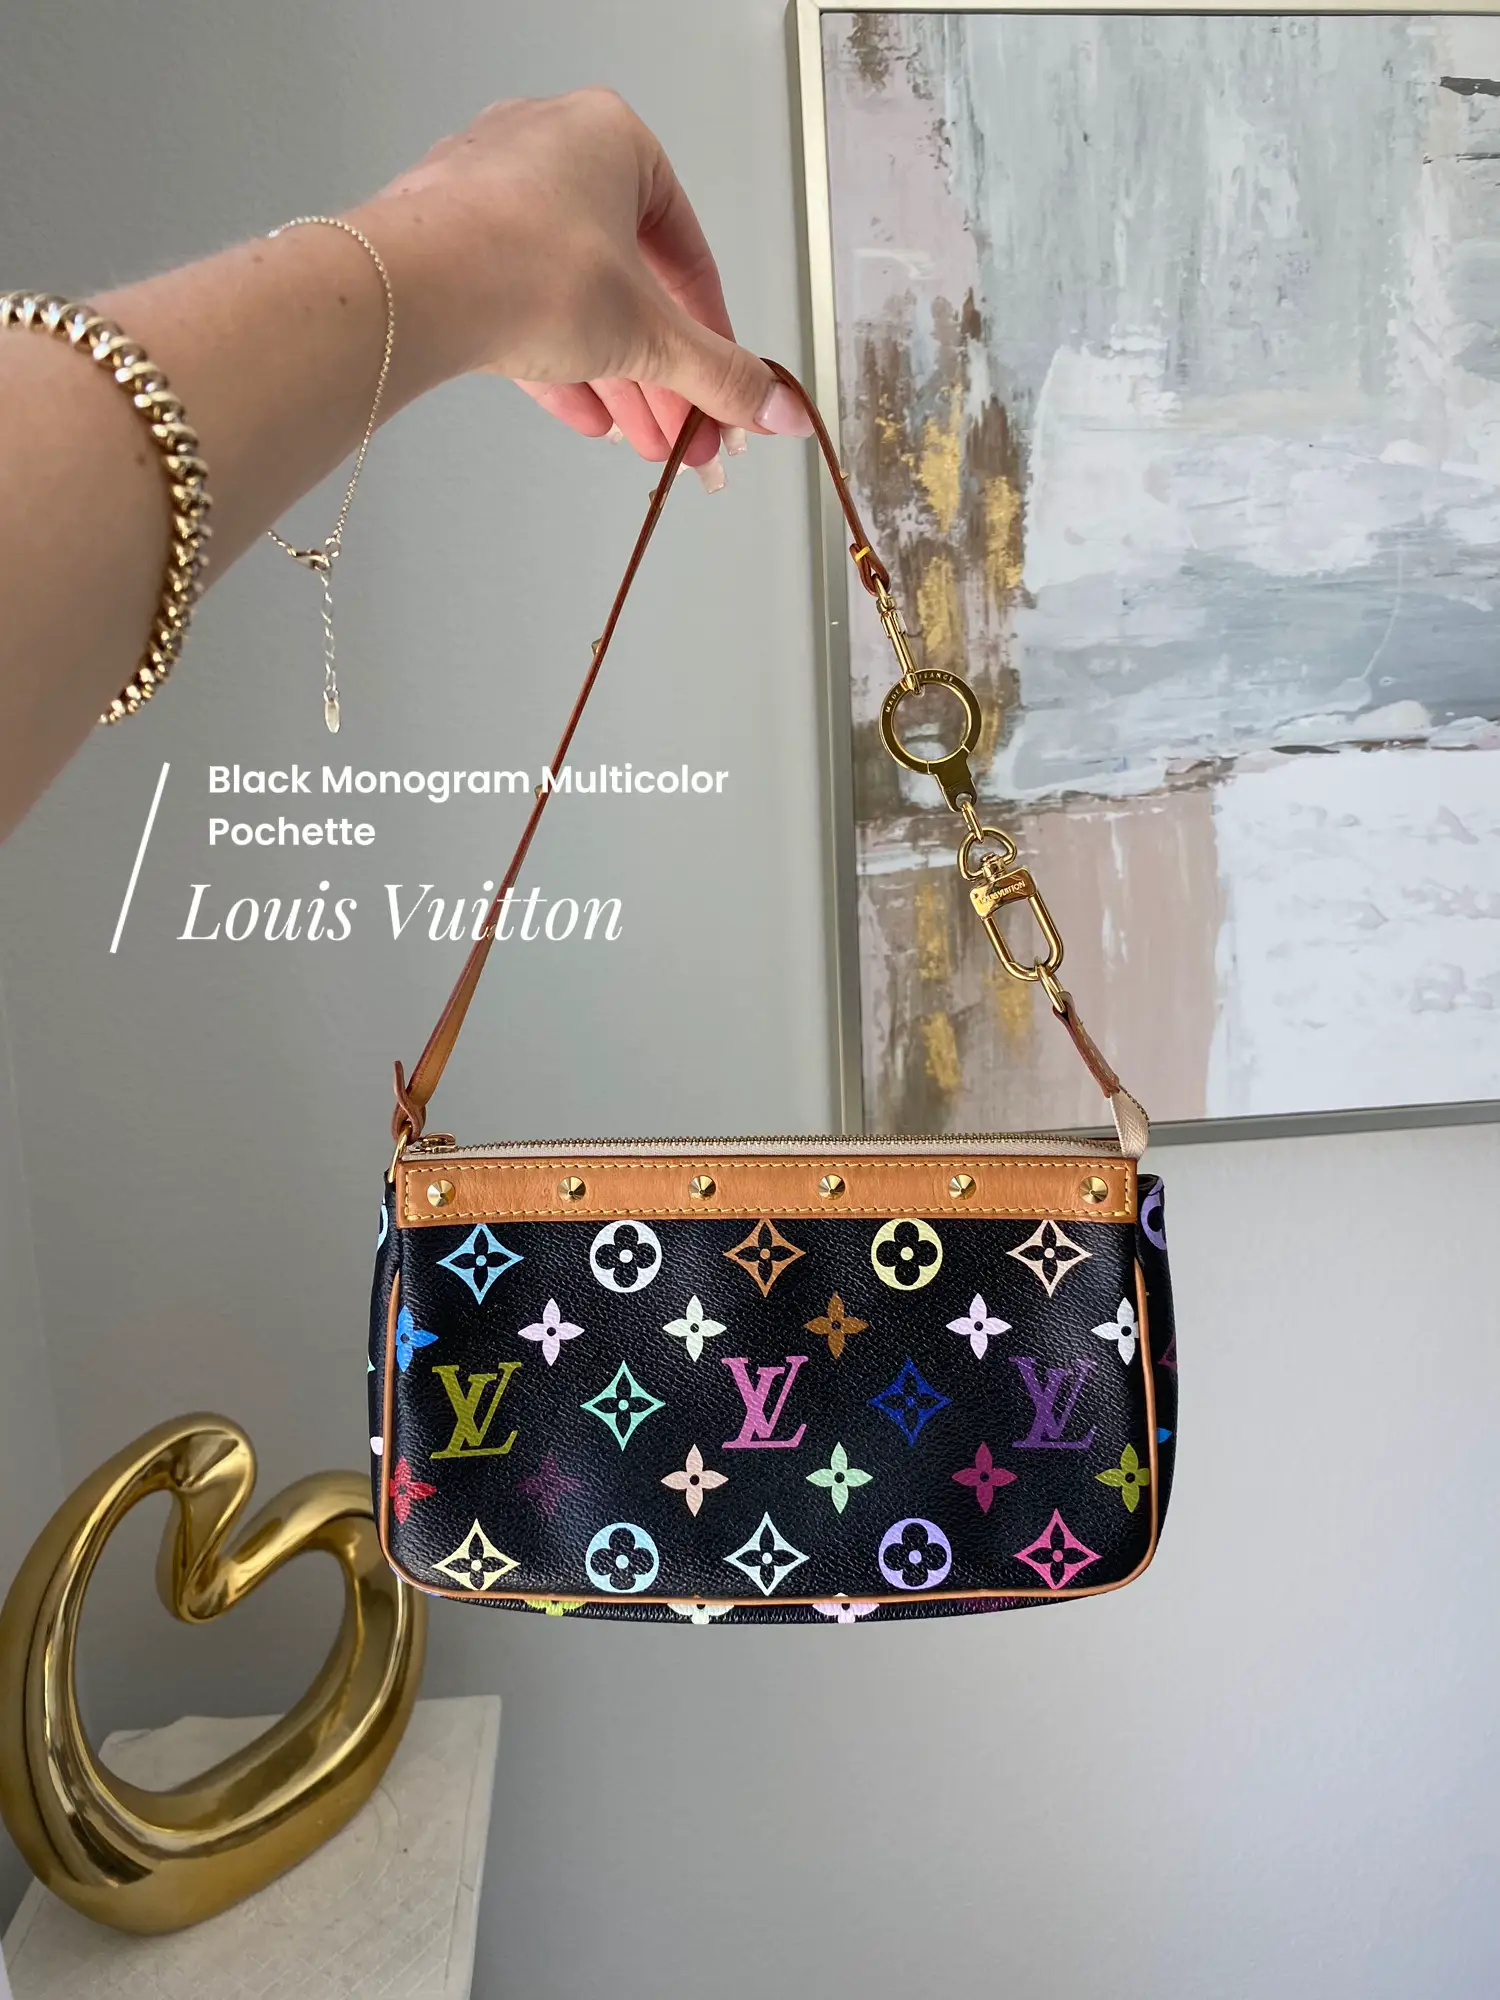 My Louis Vuitton Bag Collection, Gallery posted by Caitlin Eliza